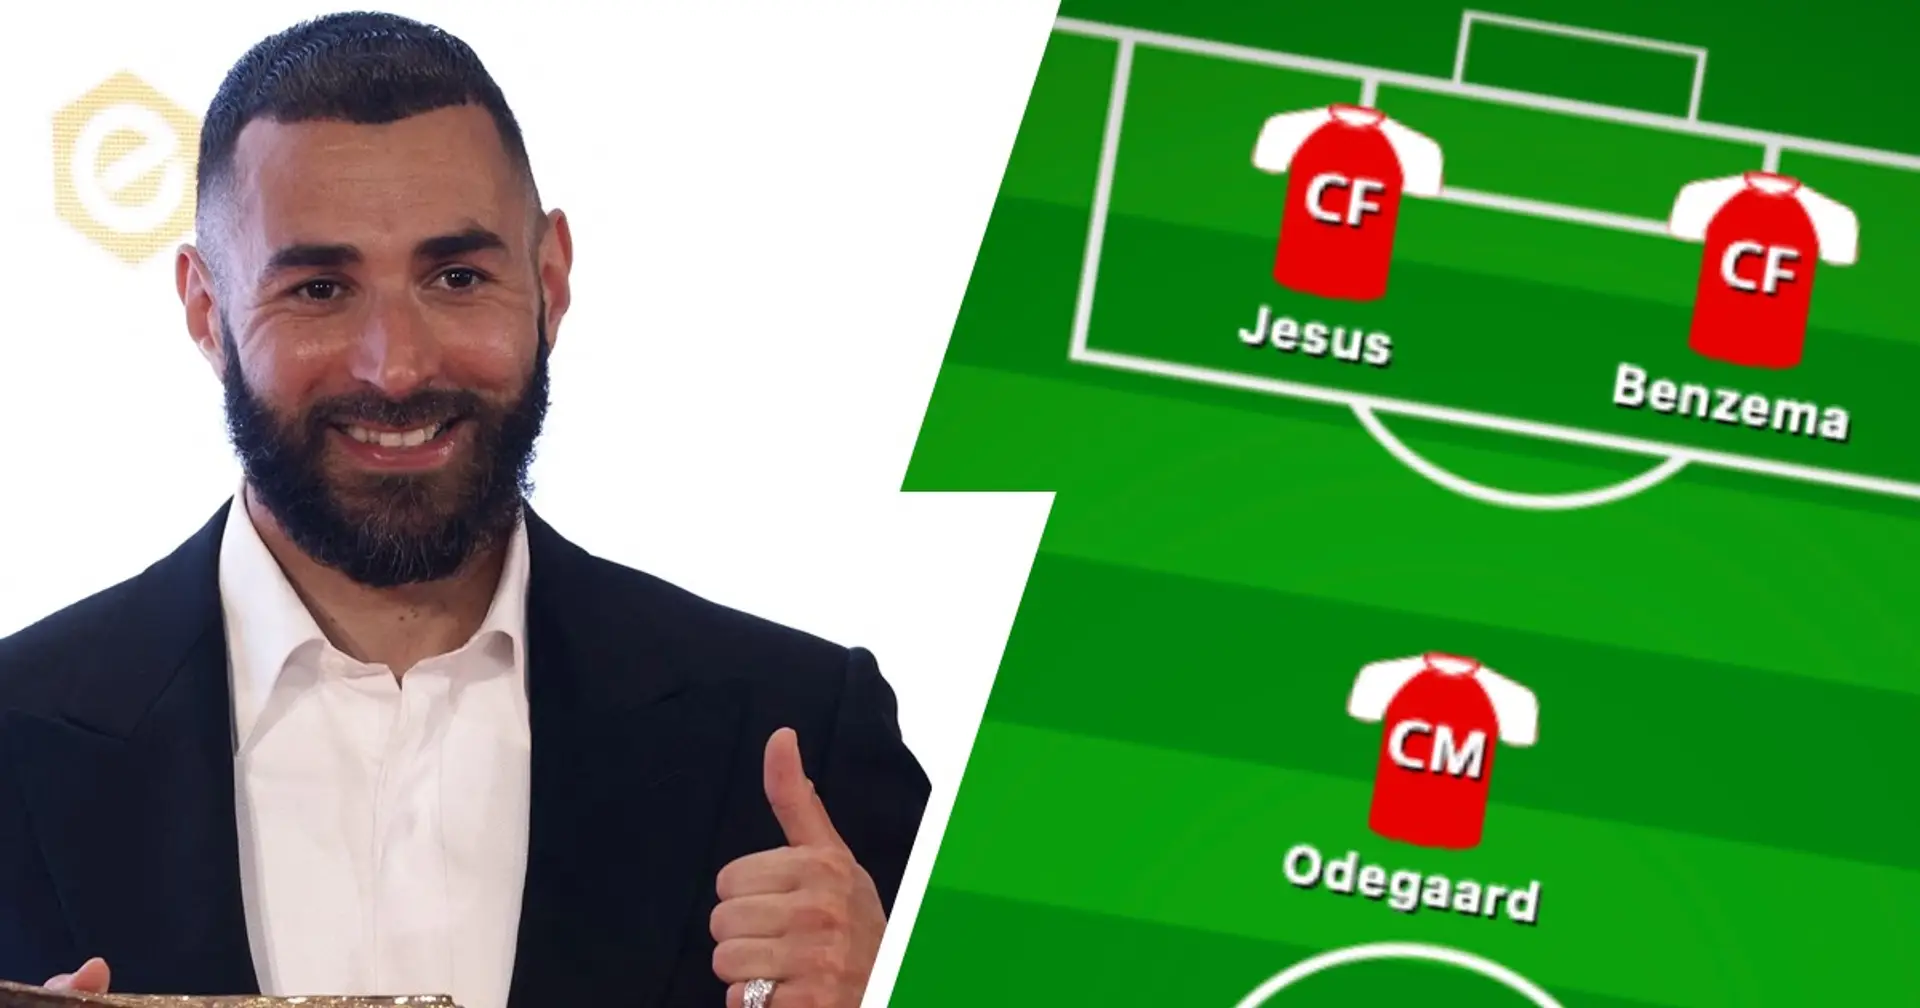 3 ways Arsenal could line up with Karim Benzema - shown in pics